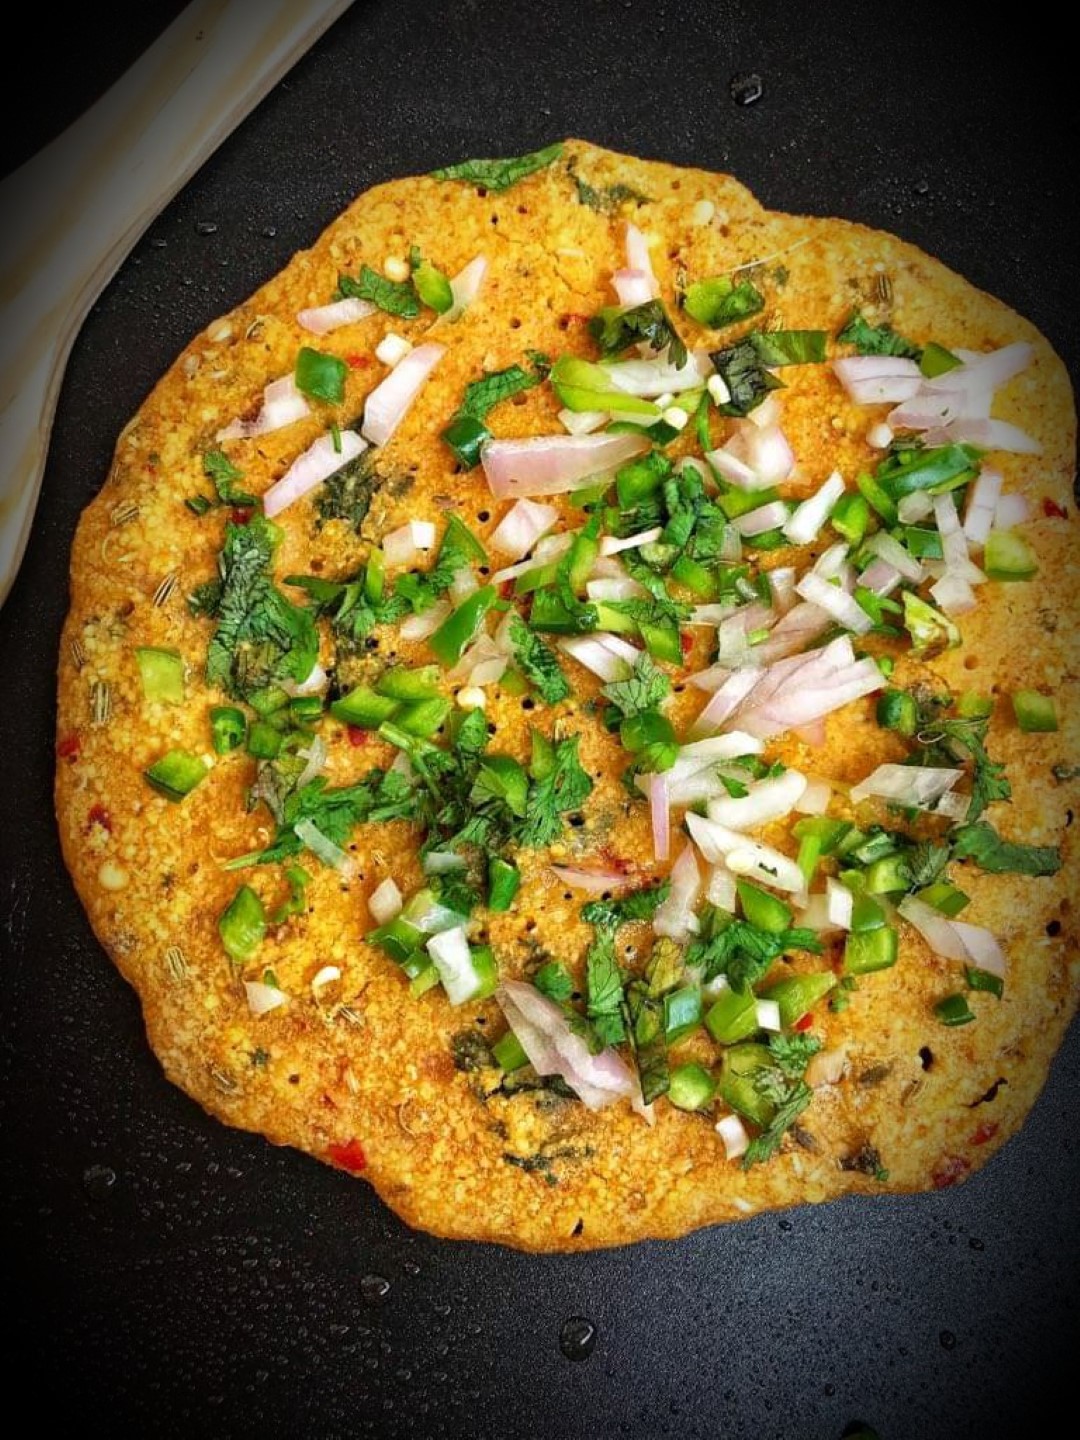 Great Indian Breakfast-Moong Dal Chilla